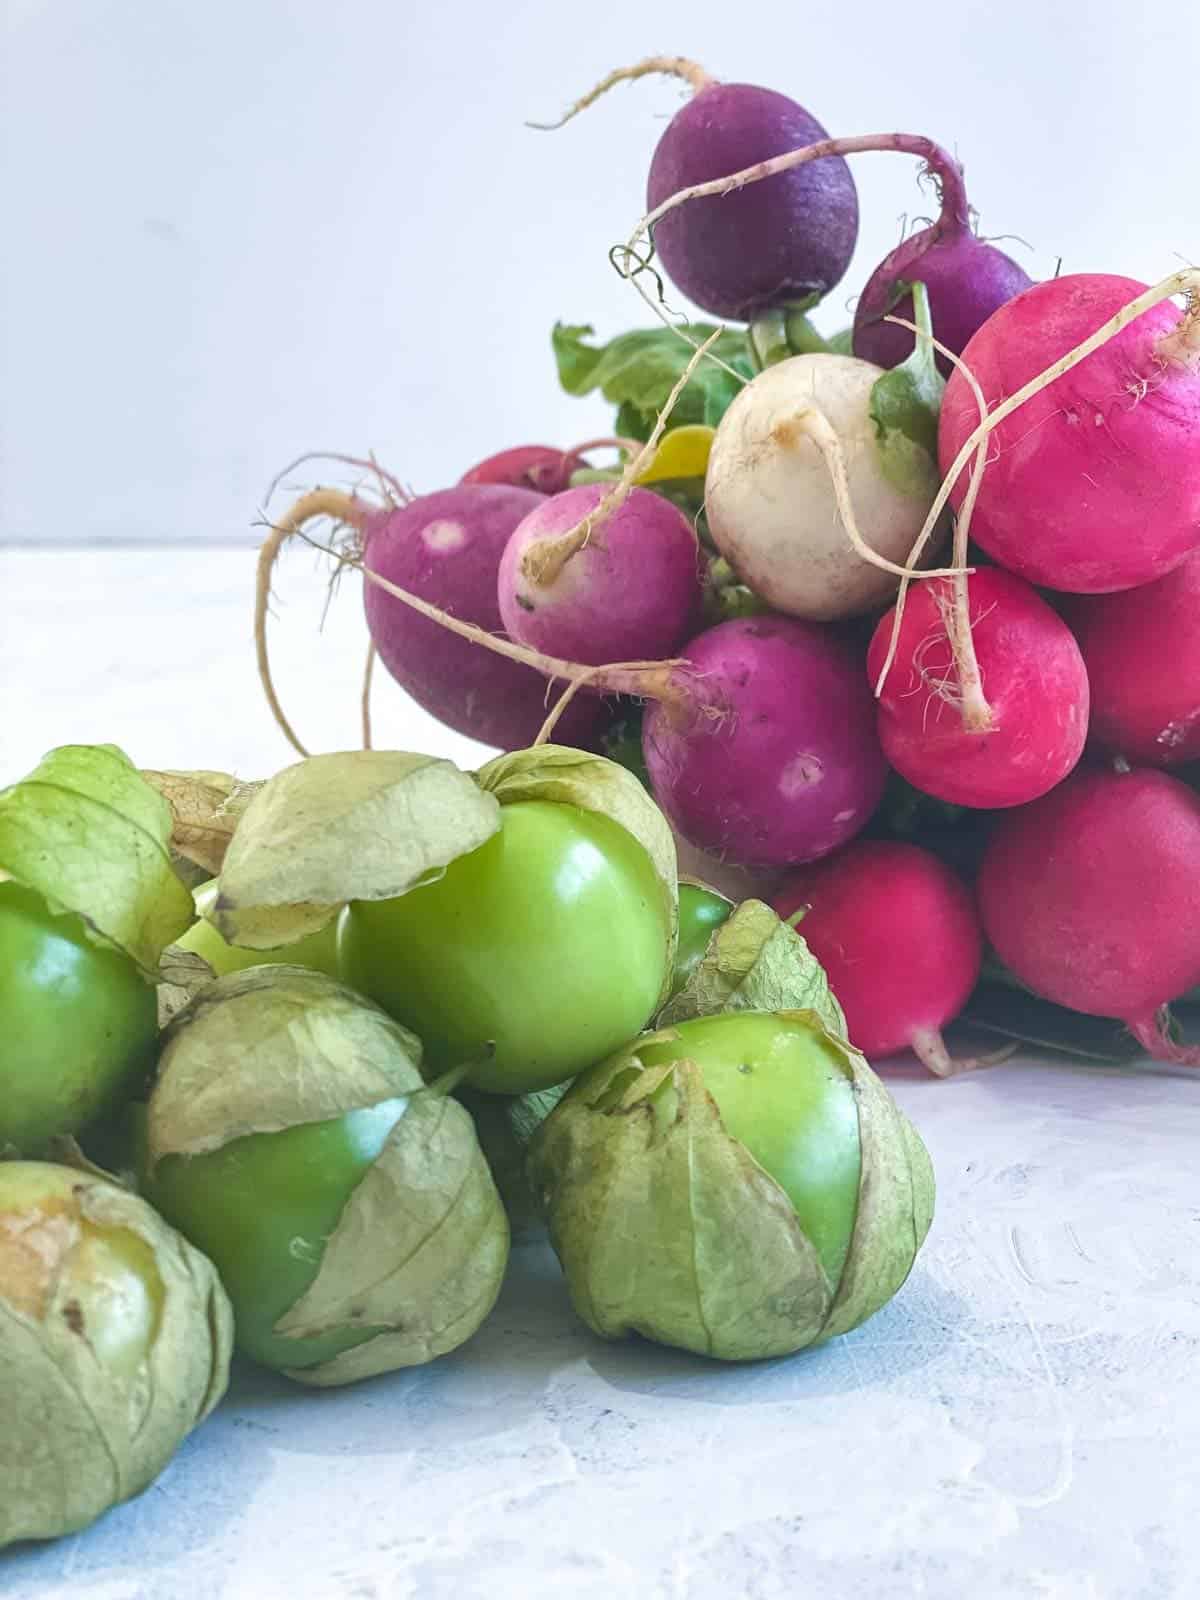 A bunch of rainbow coloured radishes next to whole tomatillos